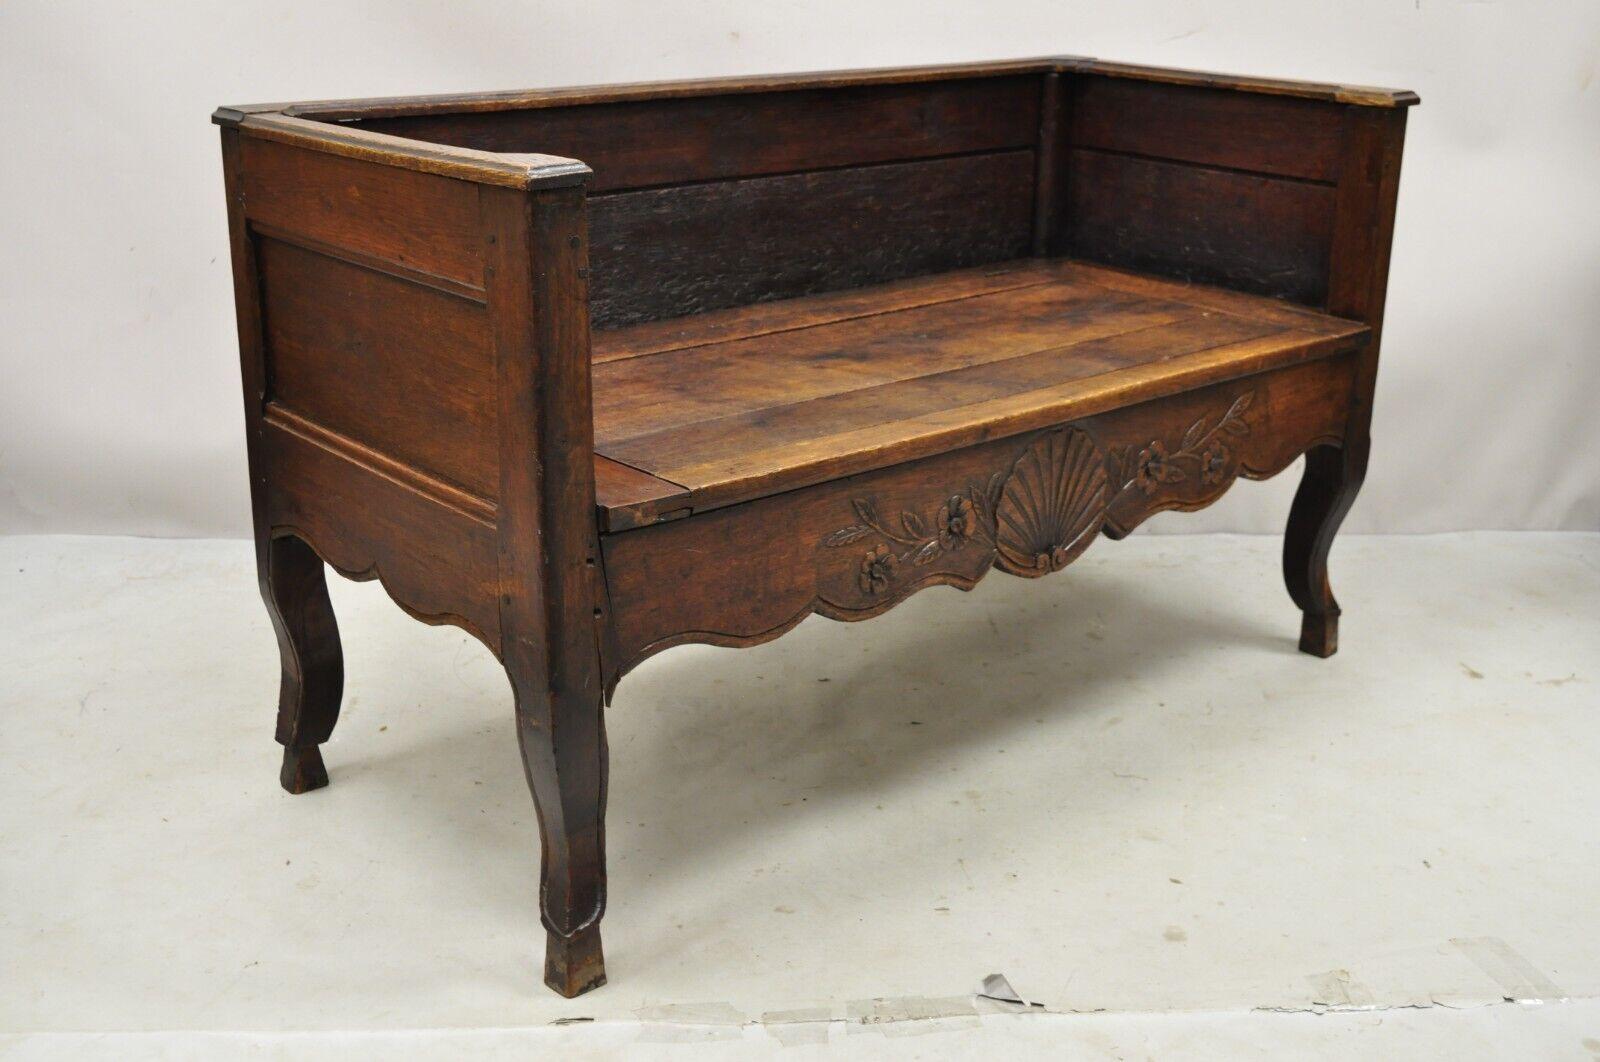 19th century French Provincial country walnut hoof foot storage window bench. Item featured has hoof feet, lift up lid with shallow storage, even arms, solid wood construction, beautiful wood grain, distressed finish, very nice antique item, quality